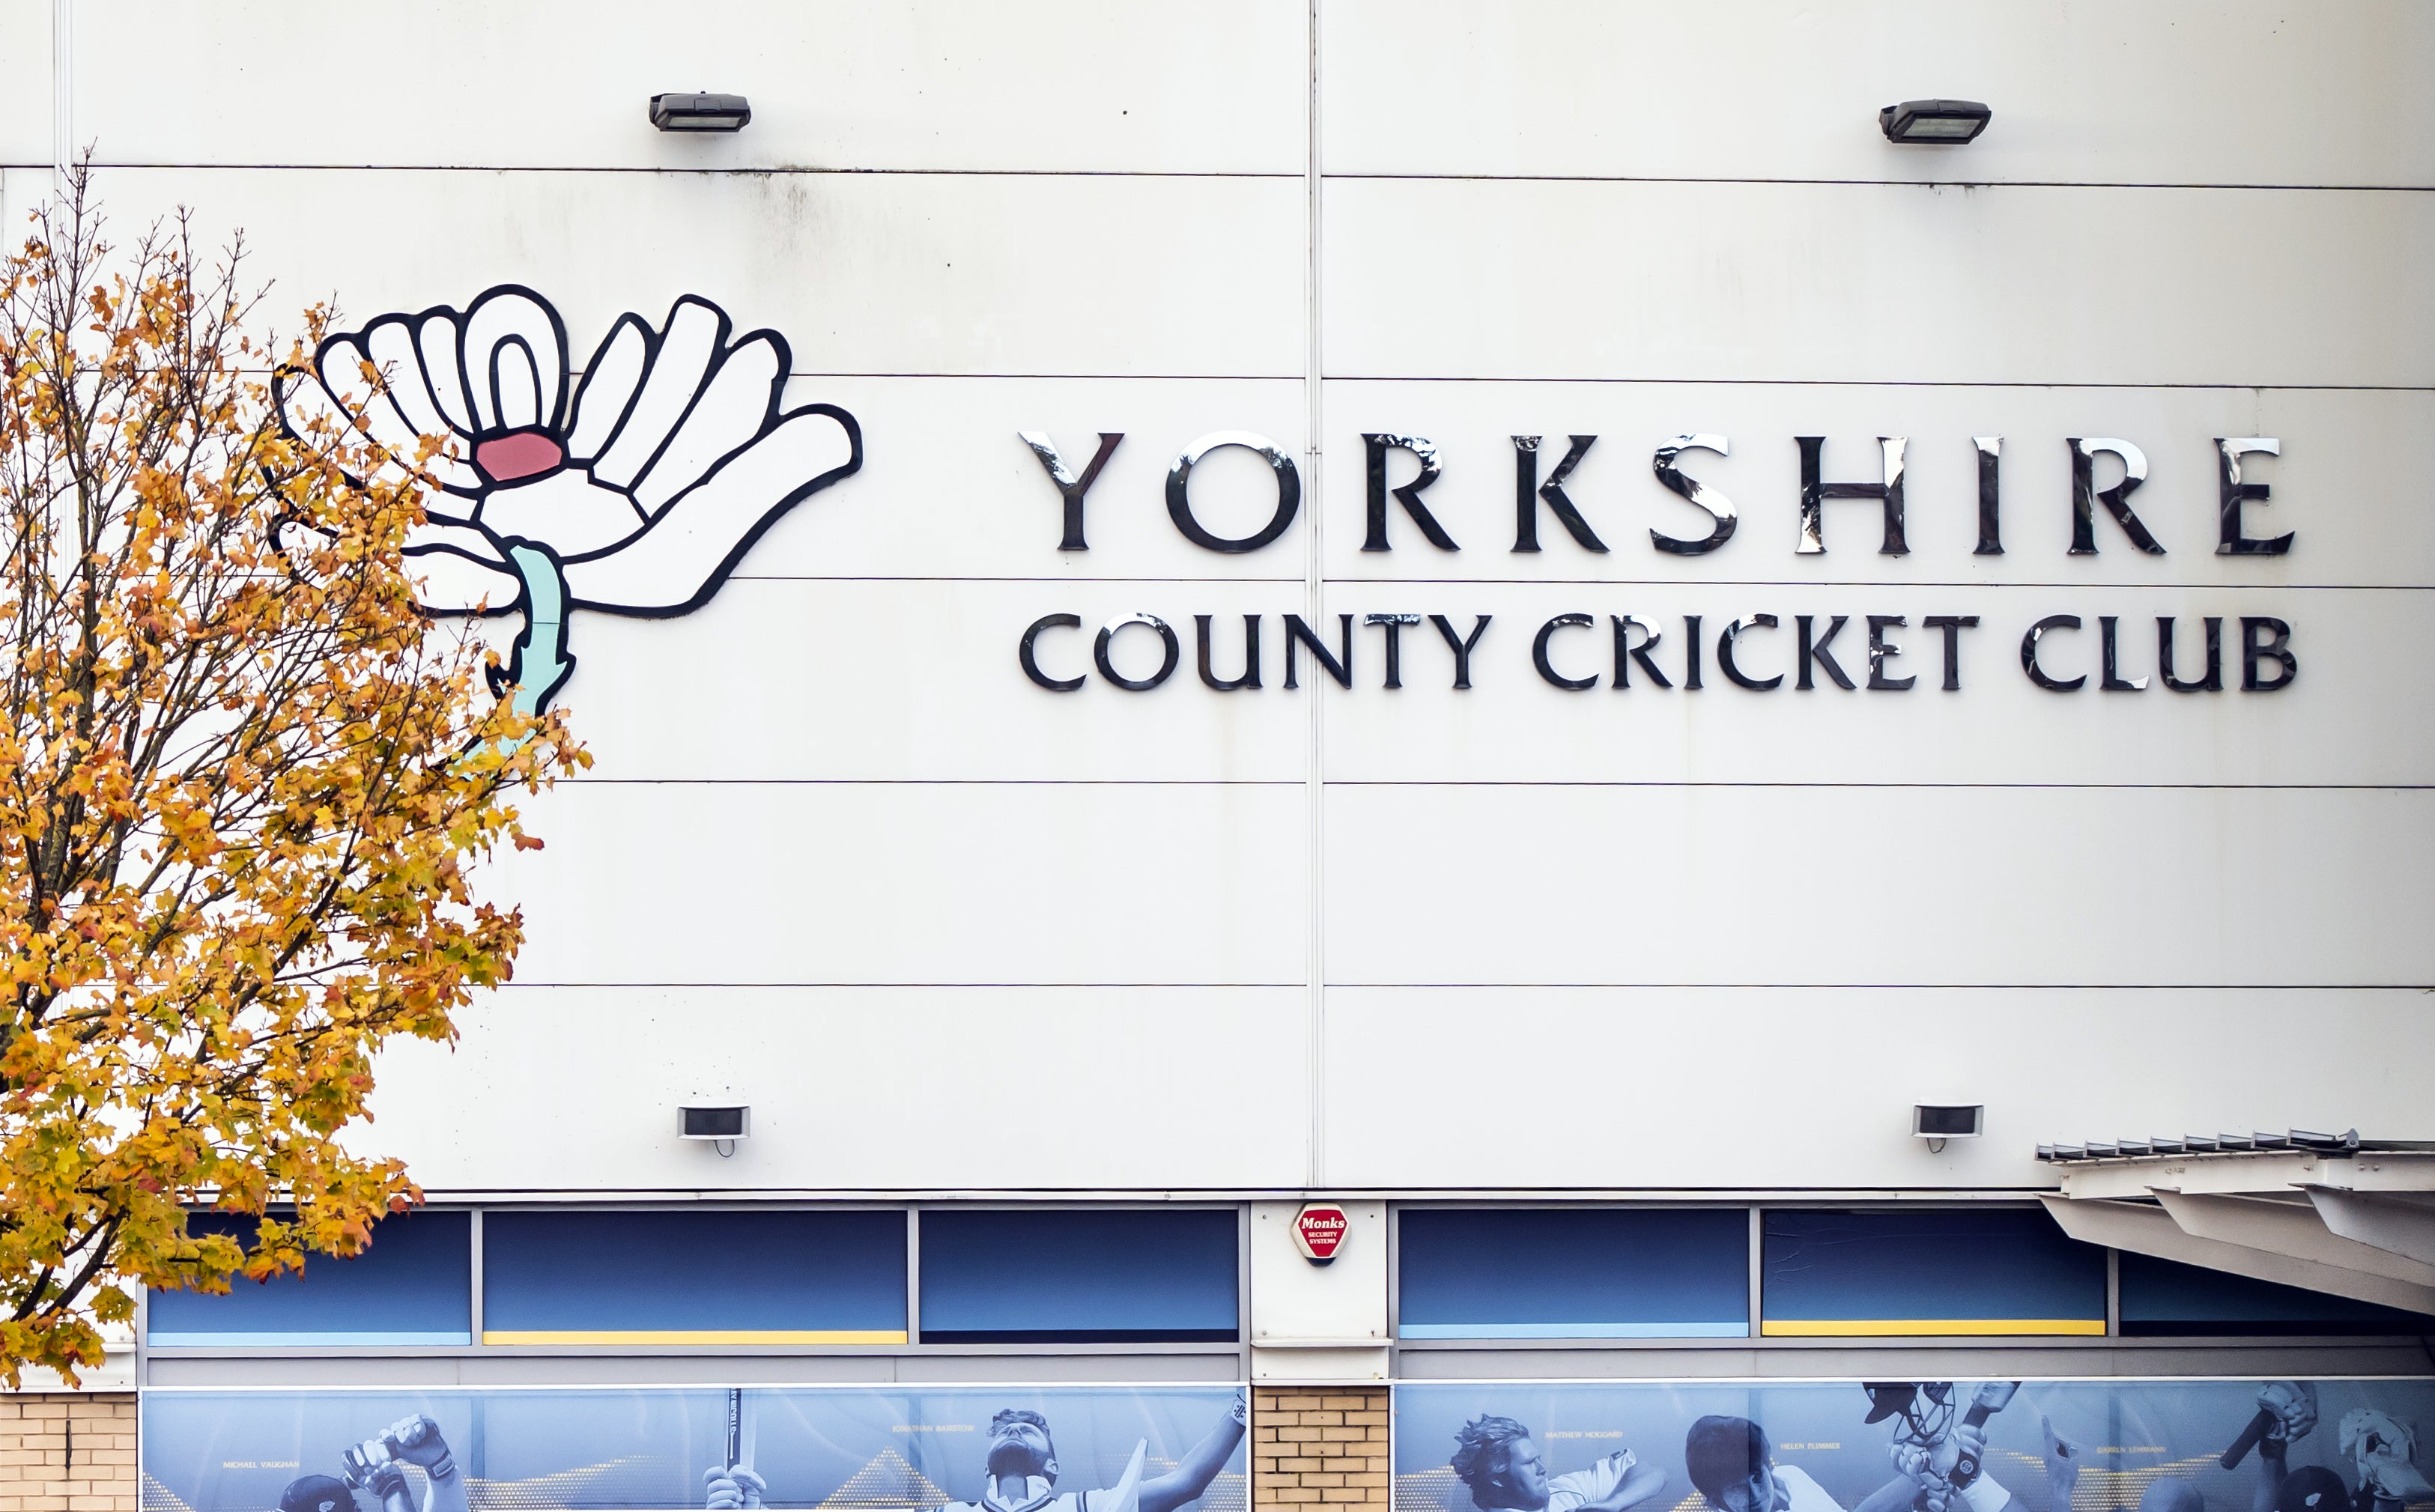 Yorkshire have been hit by a racism crisis (Danny Lawson/PA)